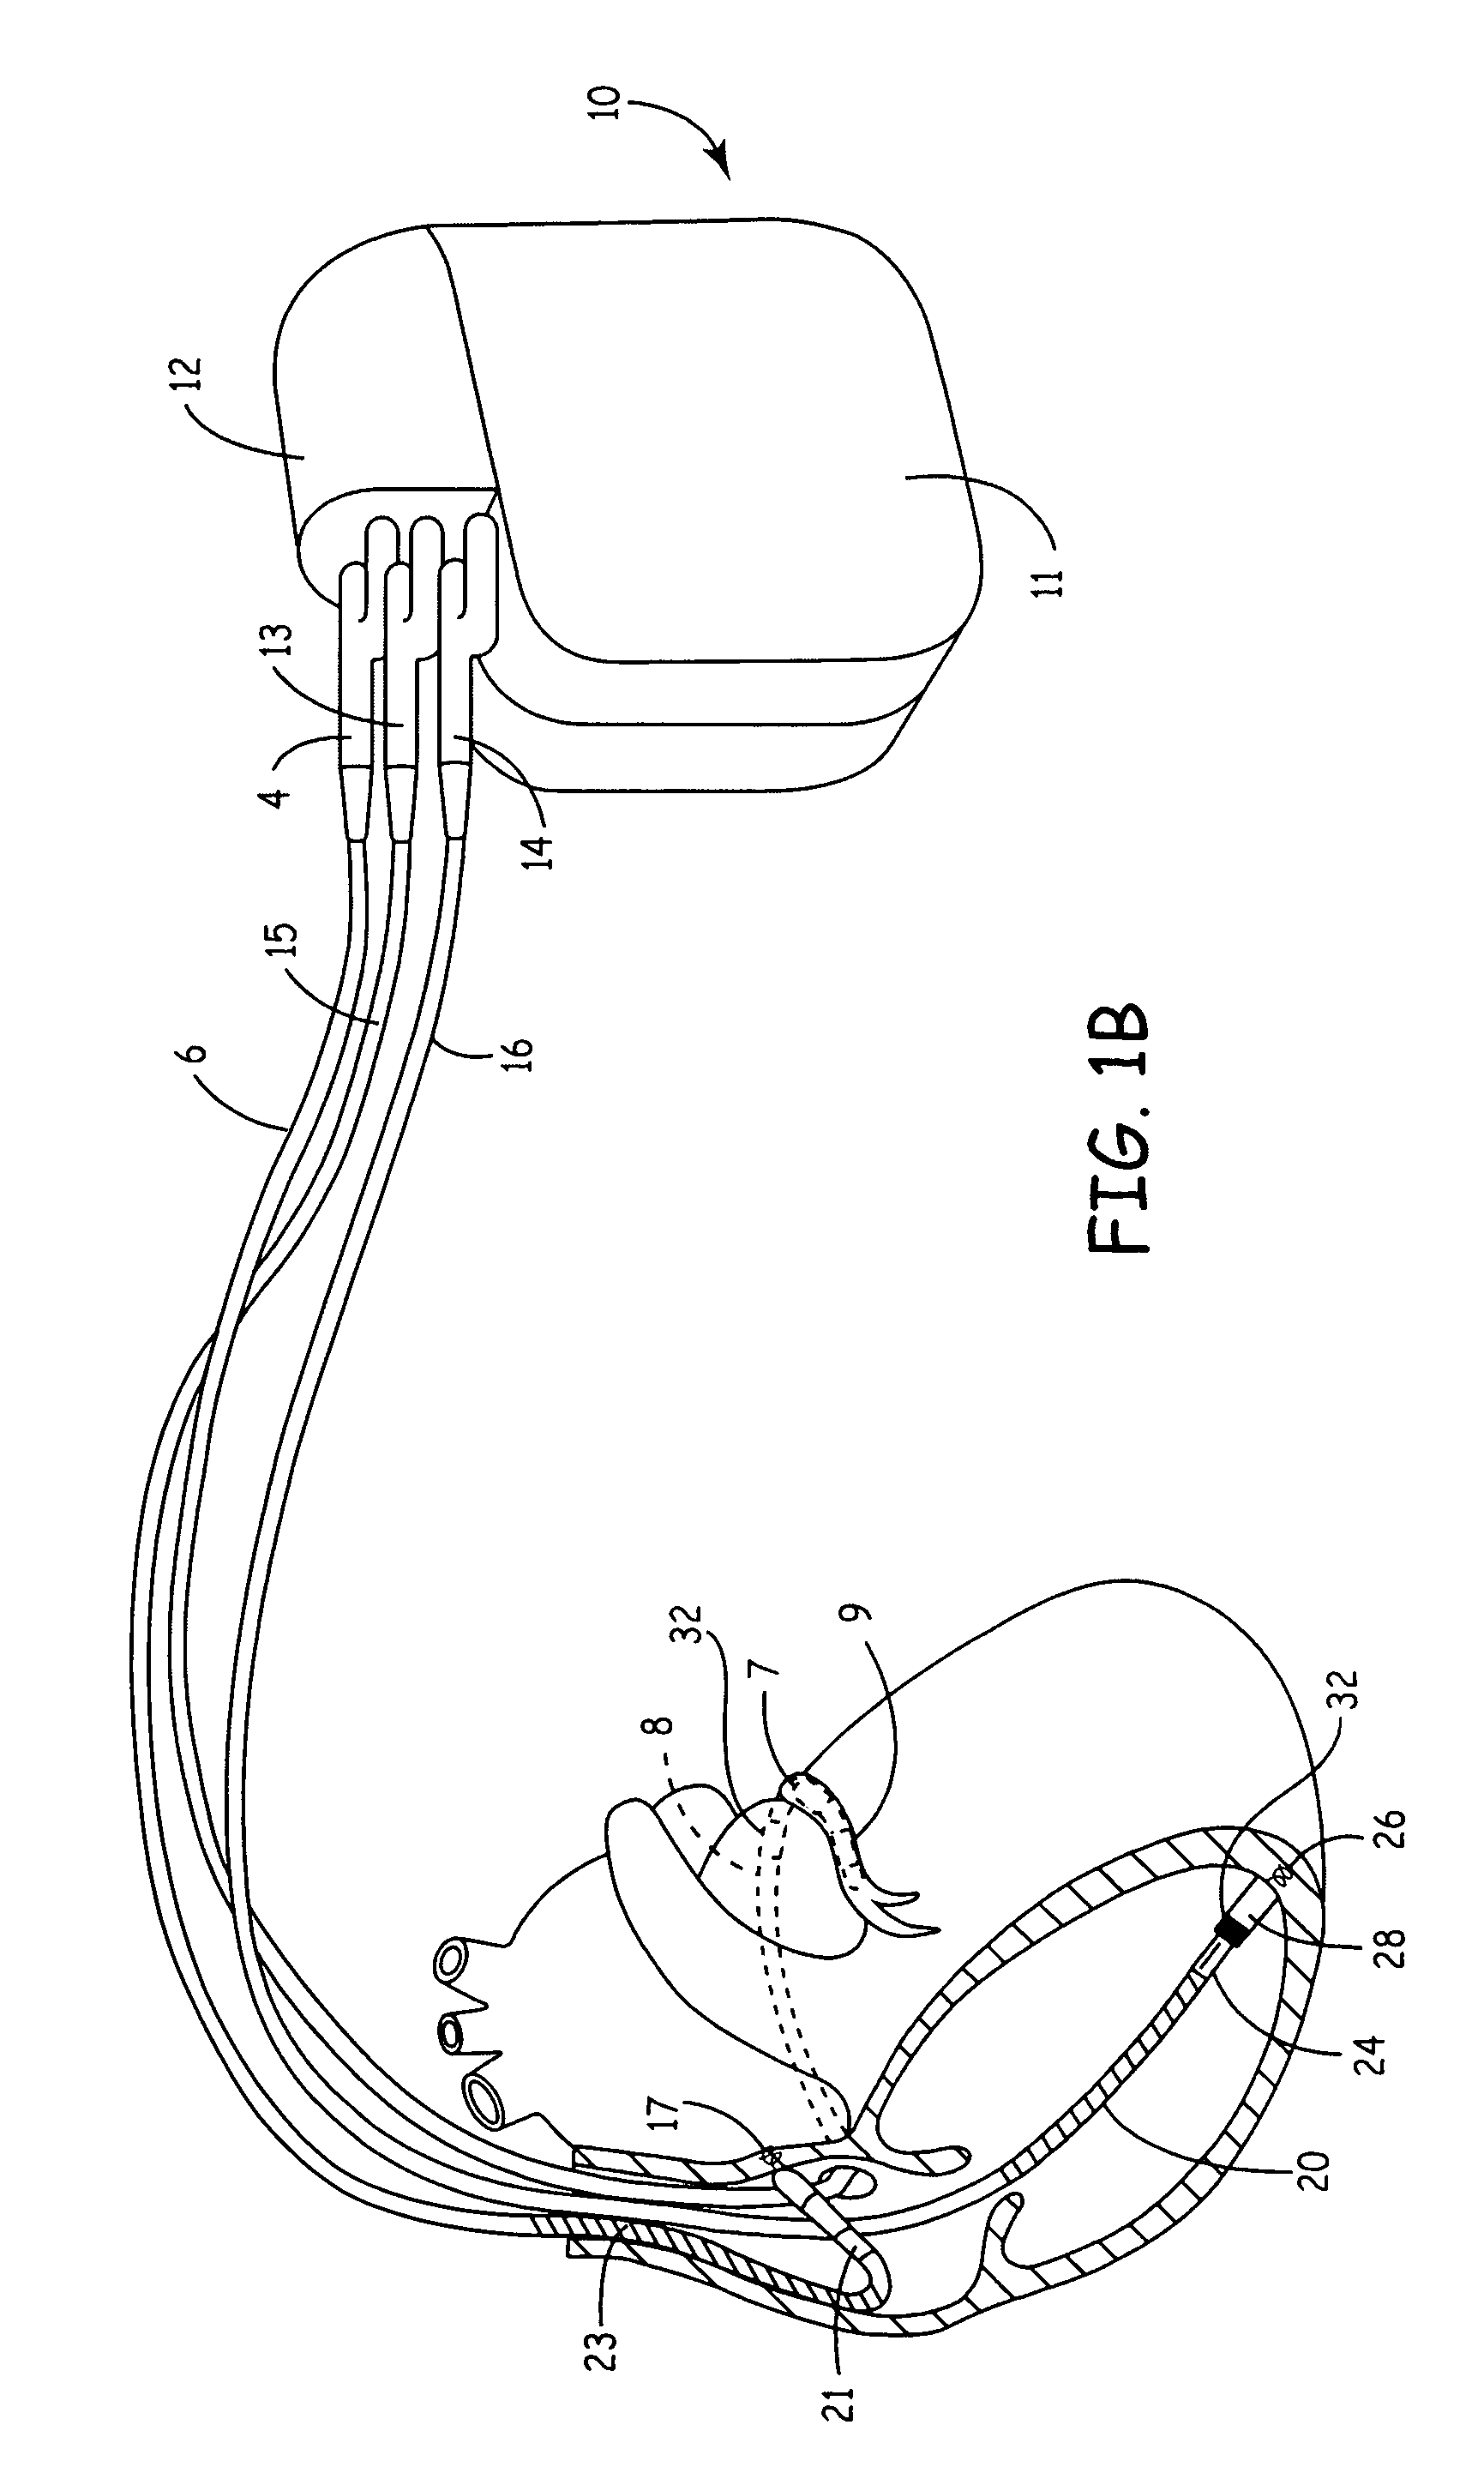 Method and apparatus for controlling extra-systolic stimulation (ESS) therapy using ischemia detection